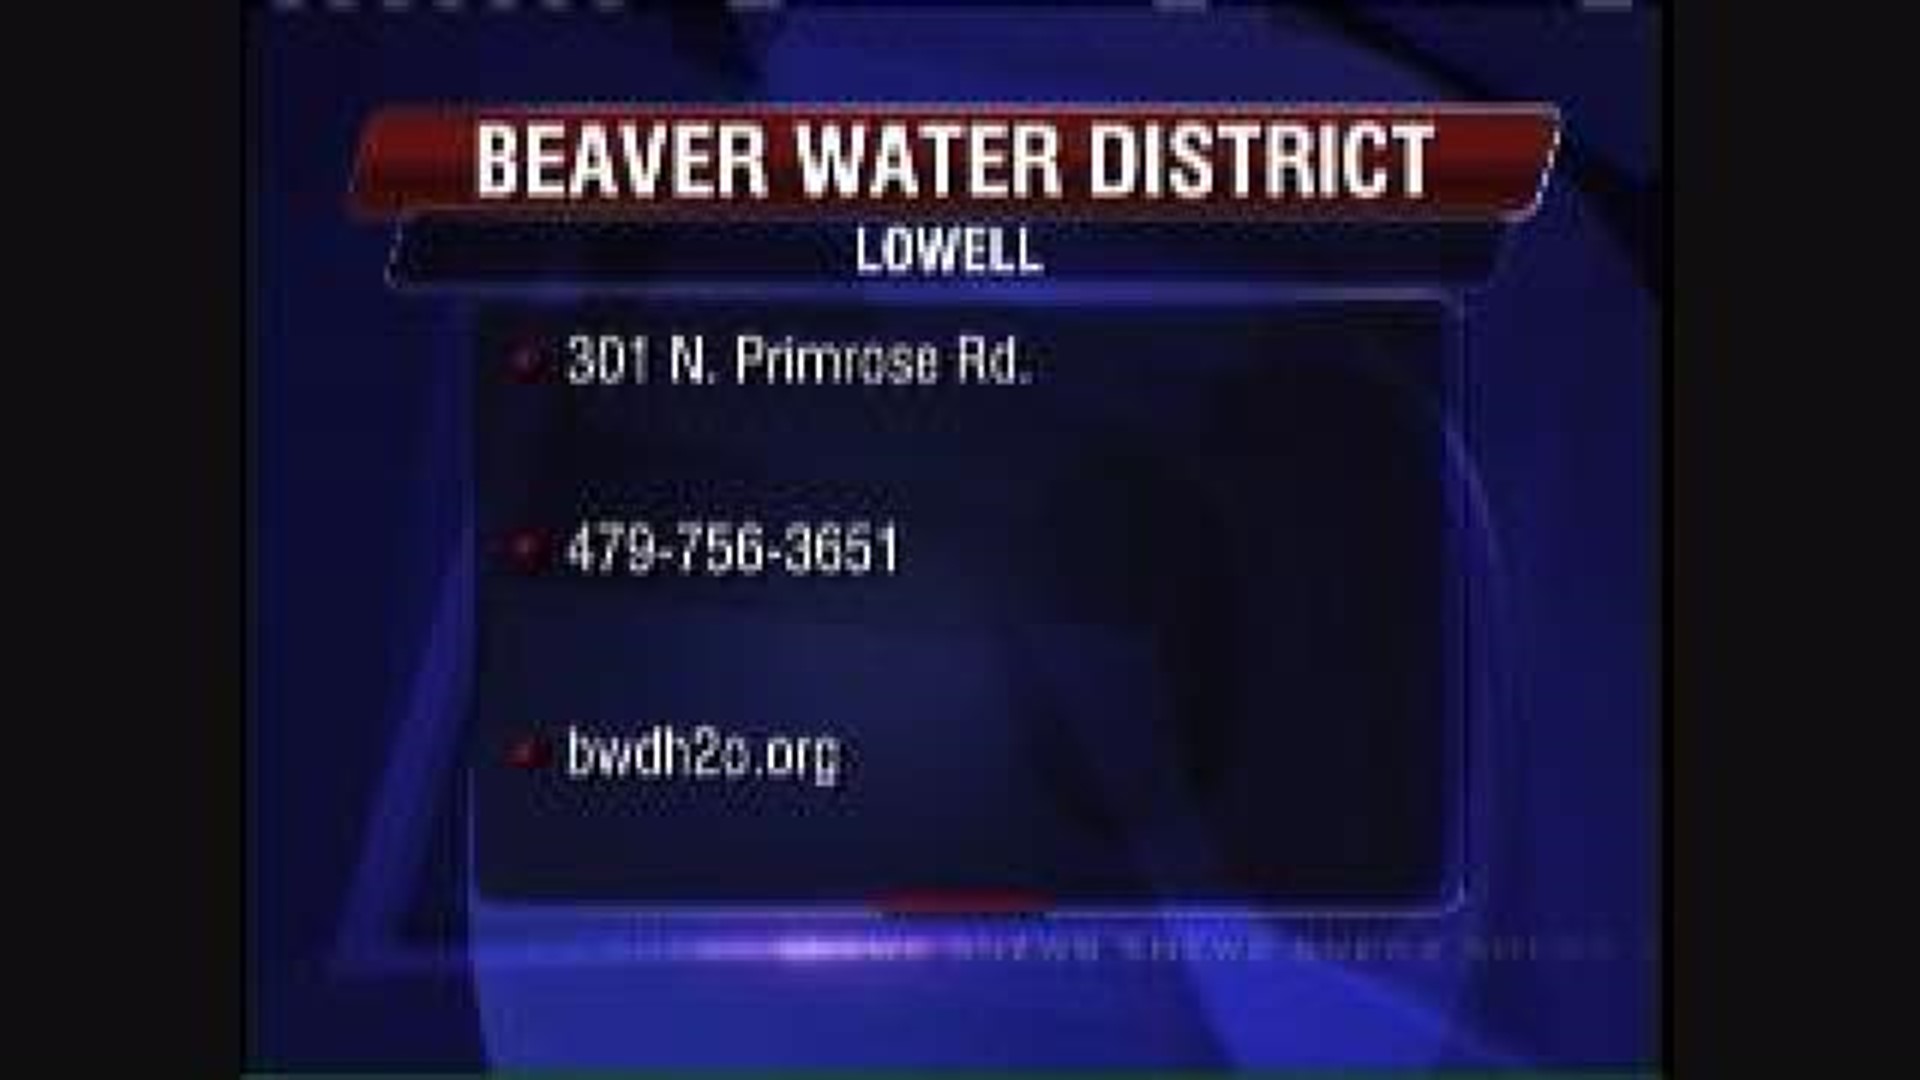 Beaver Water District